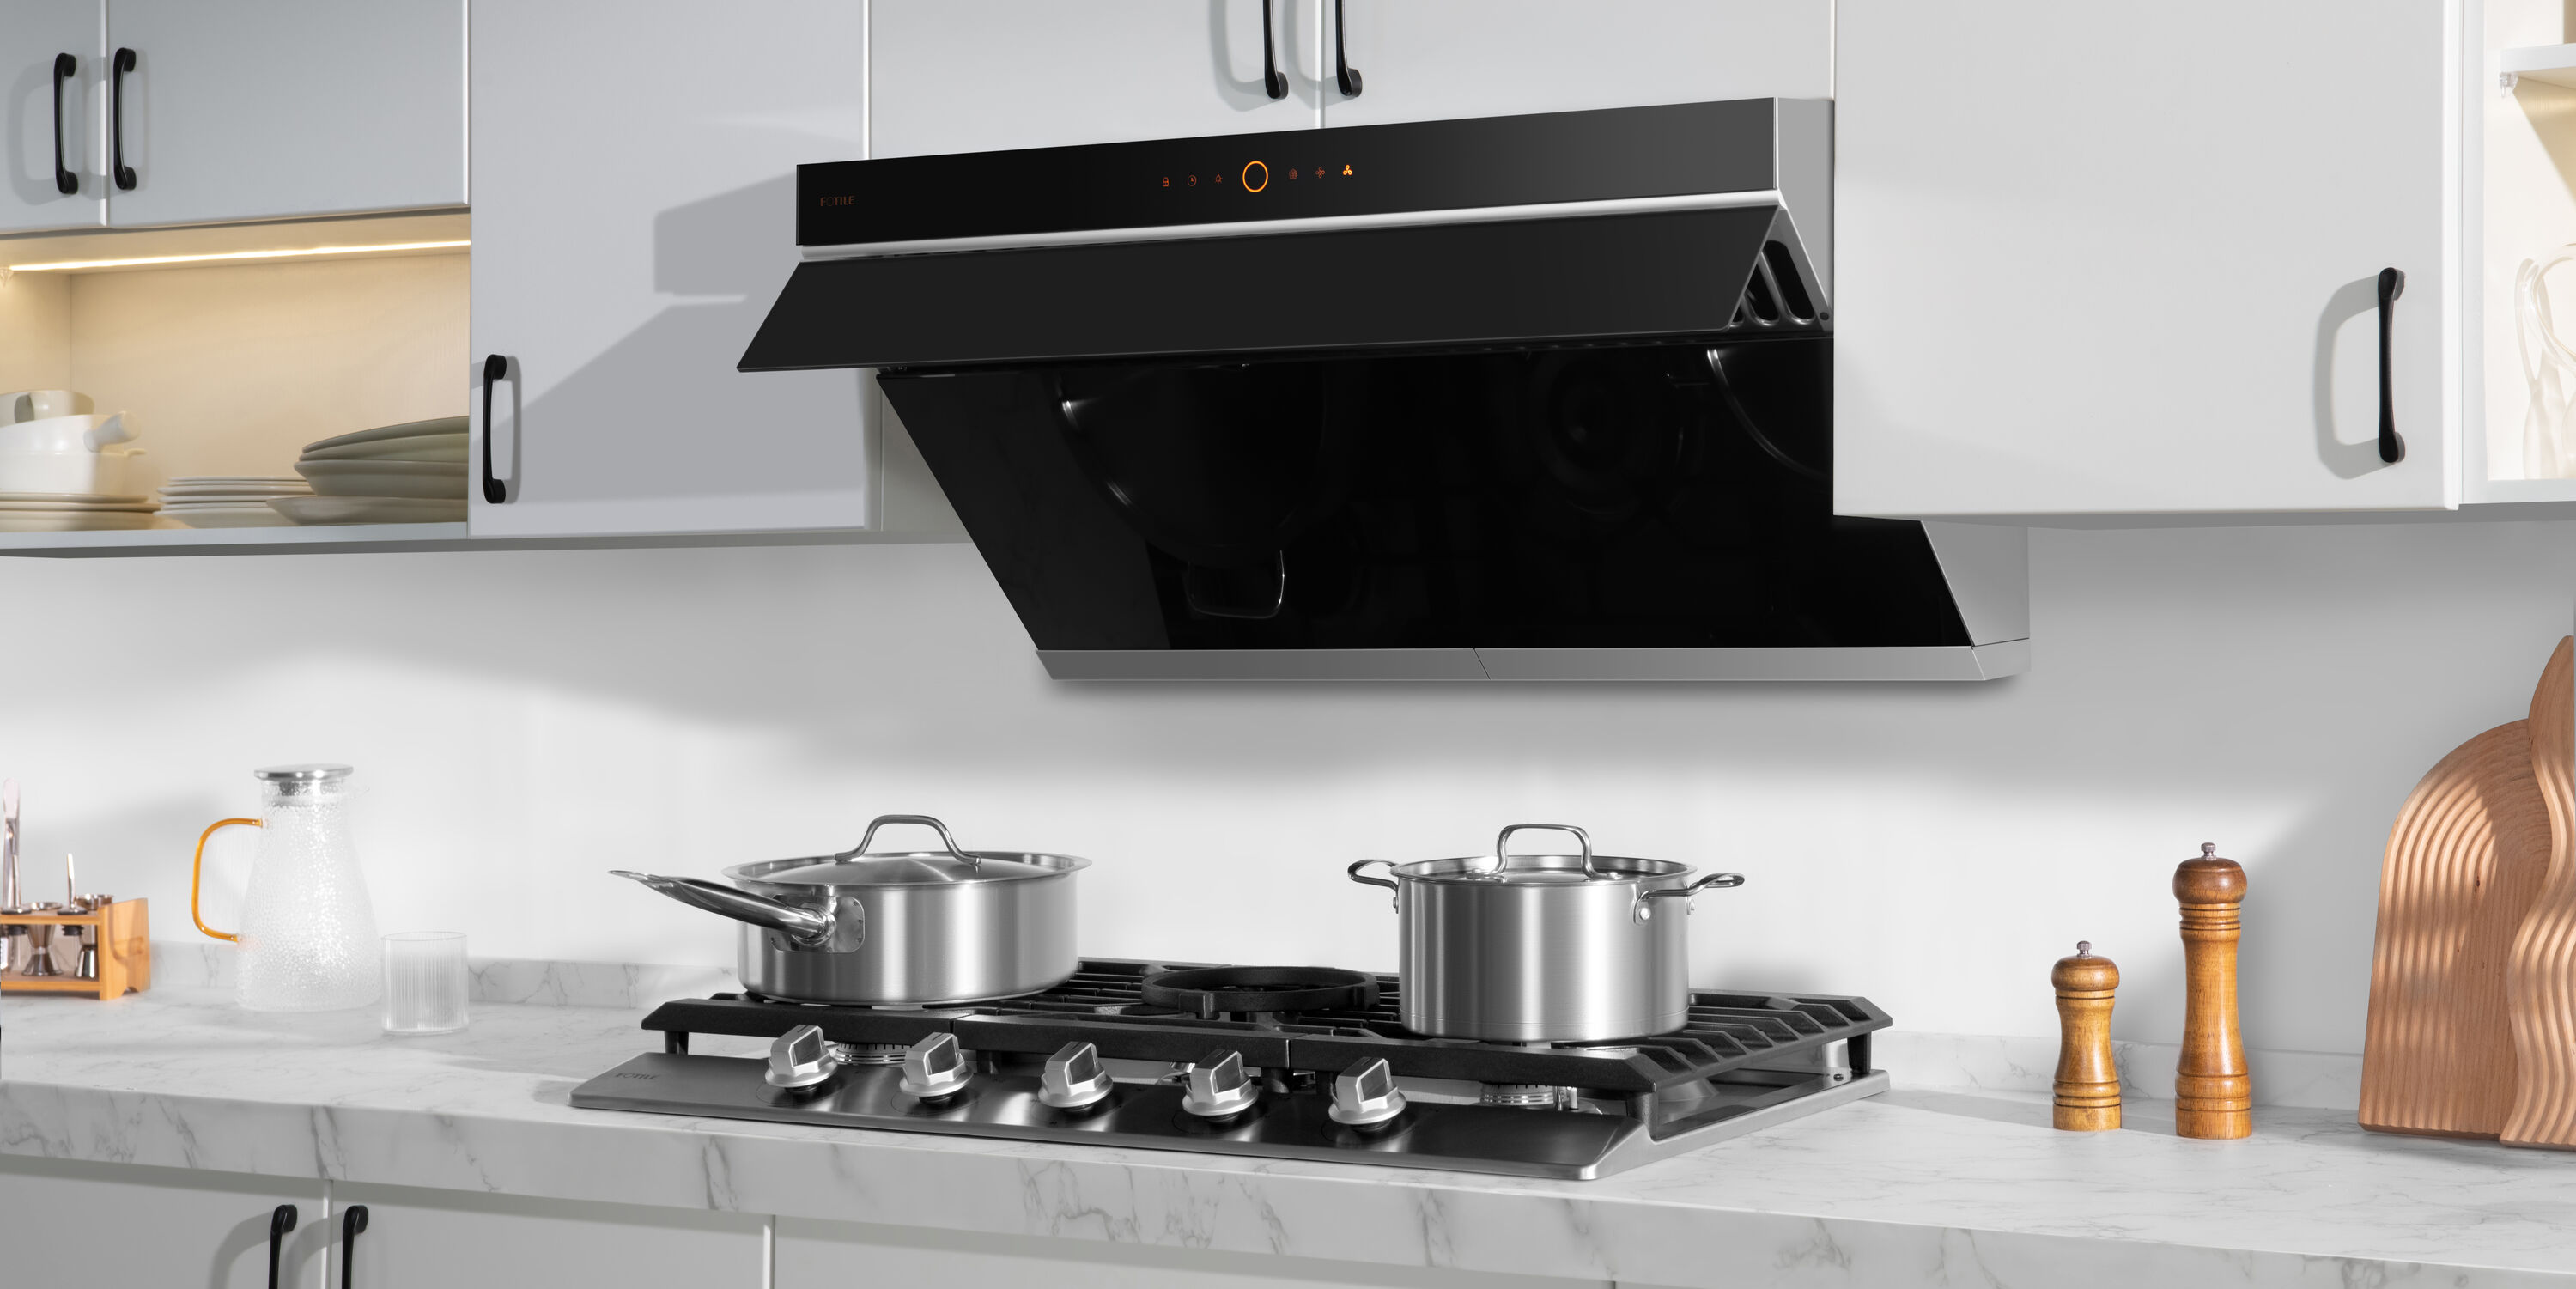 Fotile Package 30 Inch Cooktop and 30 Inch Under Cabinet Range Hood in  Silver Gray, 850CFM, AP-GLS30501-7